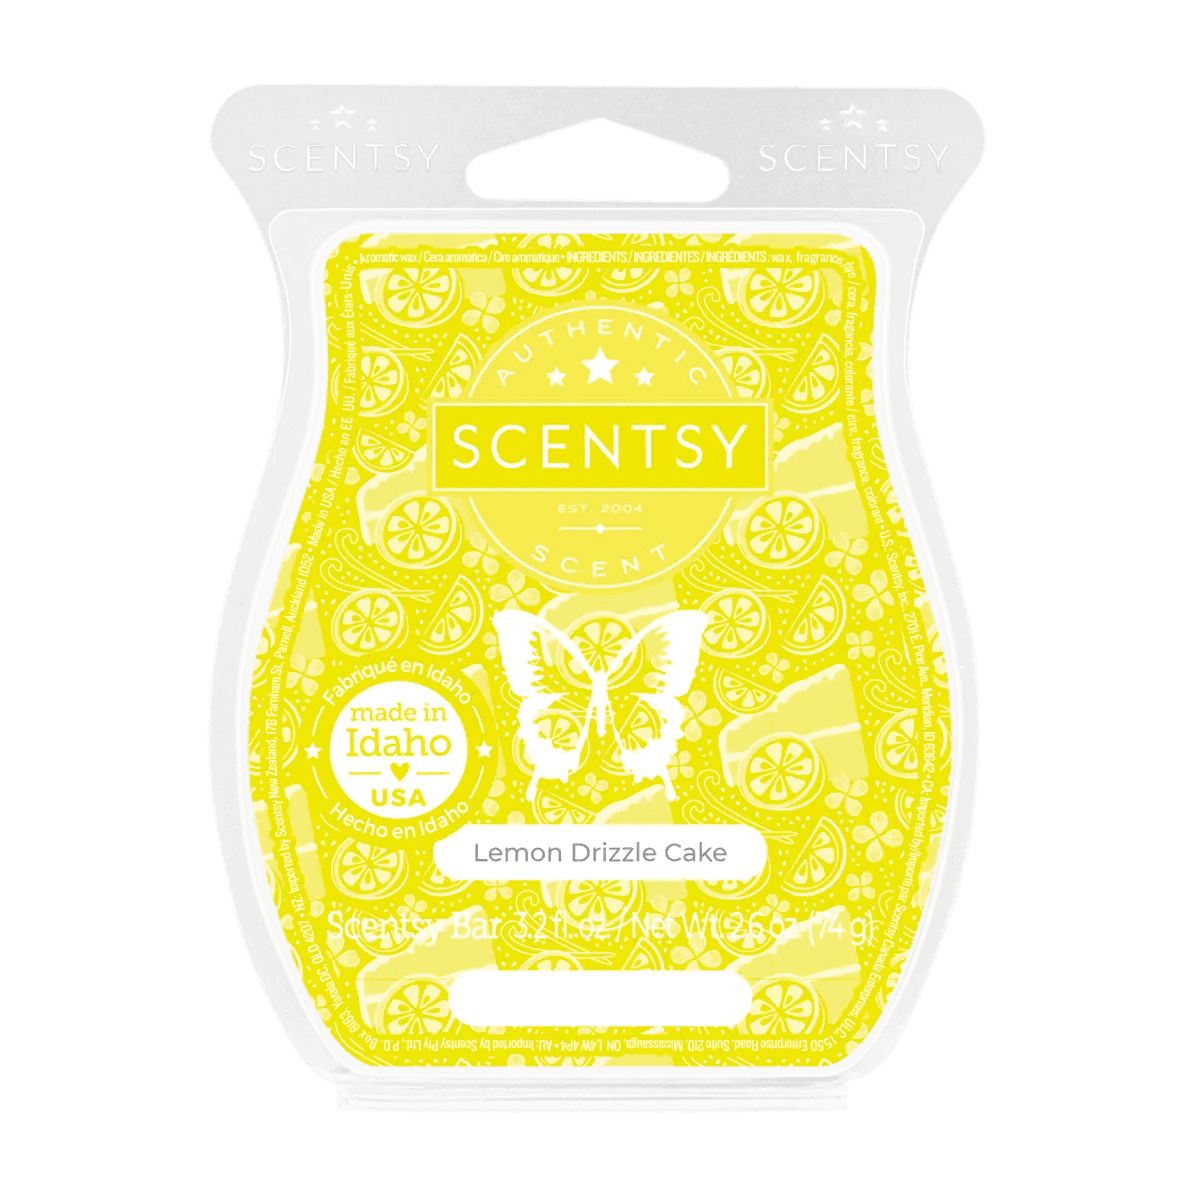 Picture of Scentsy Lemon Drizzle Cake Scentsy Bar